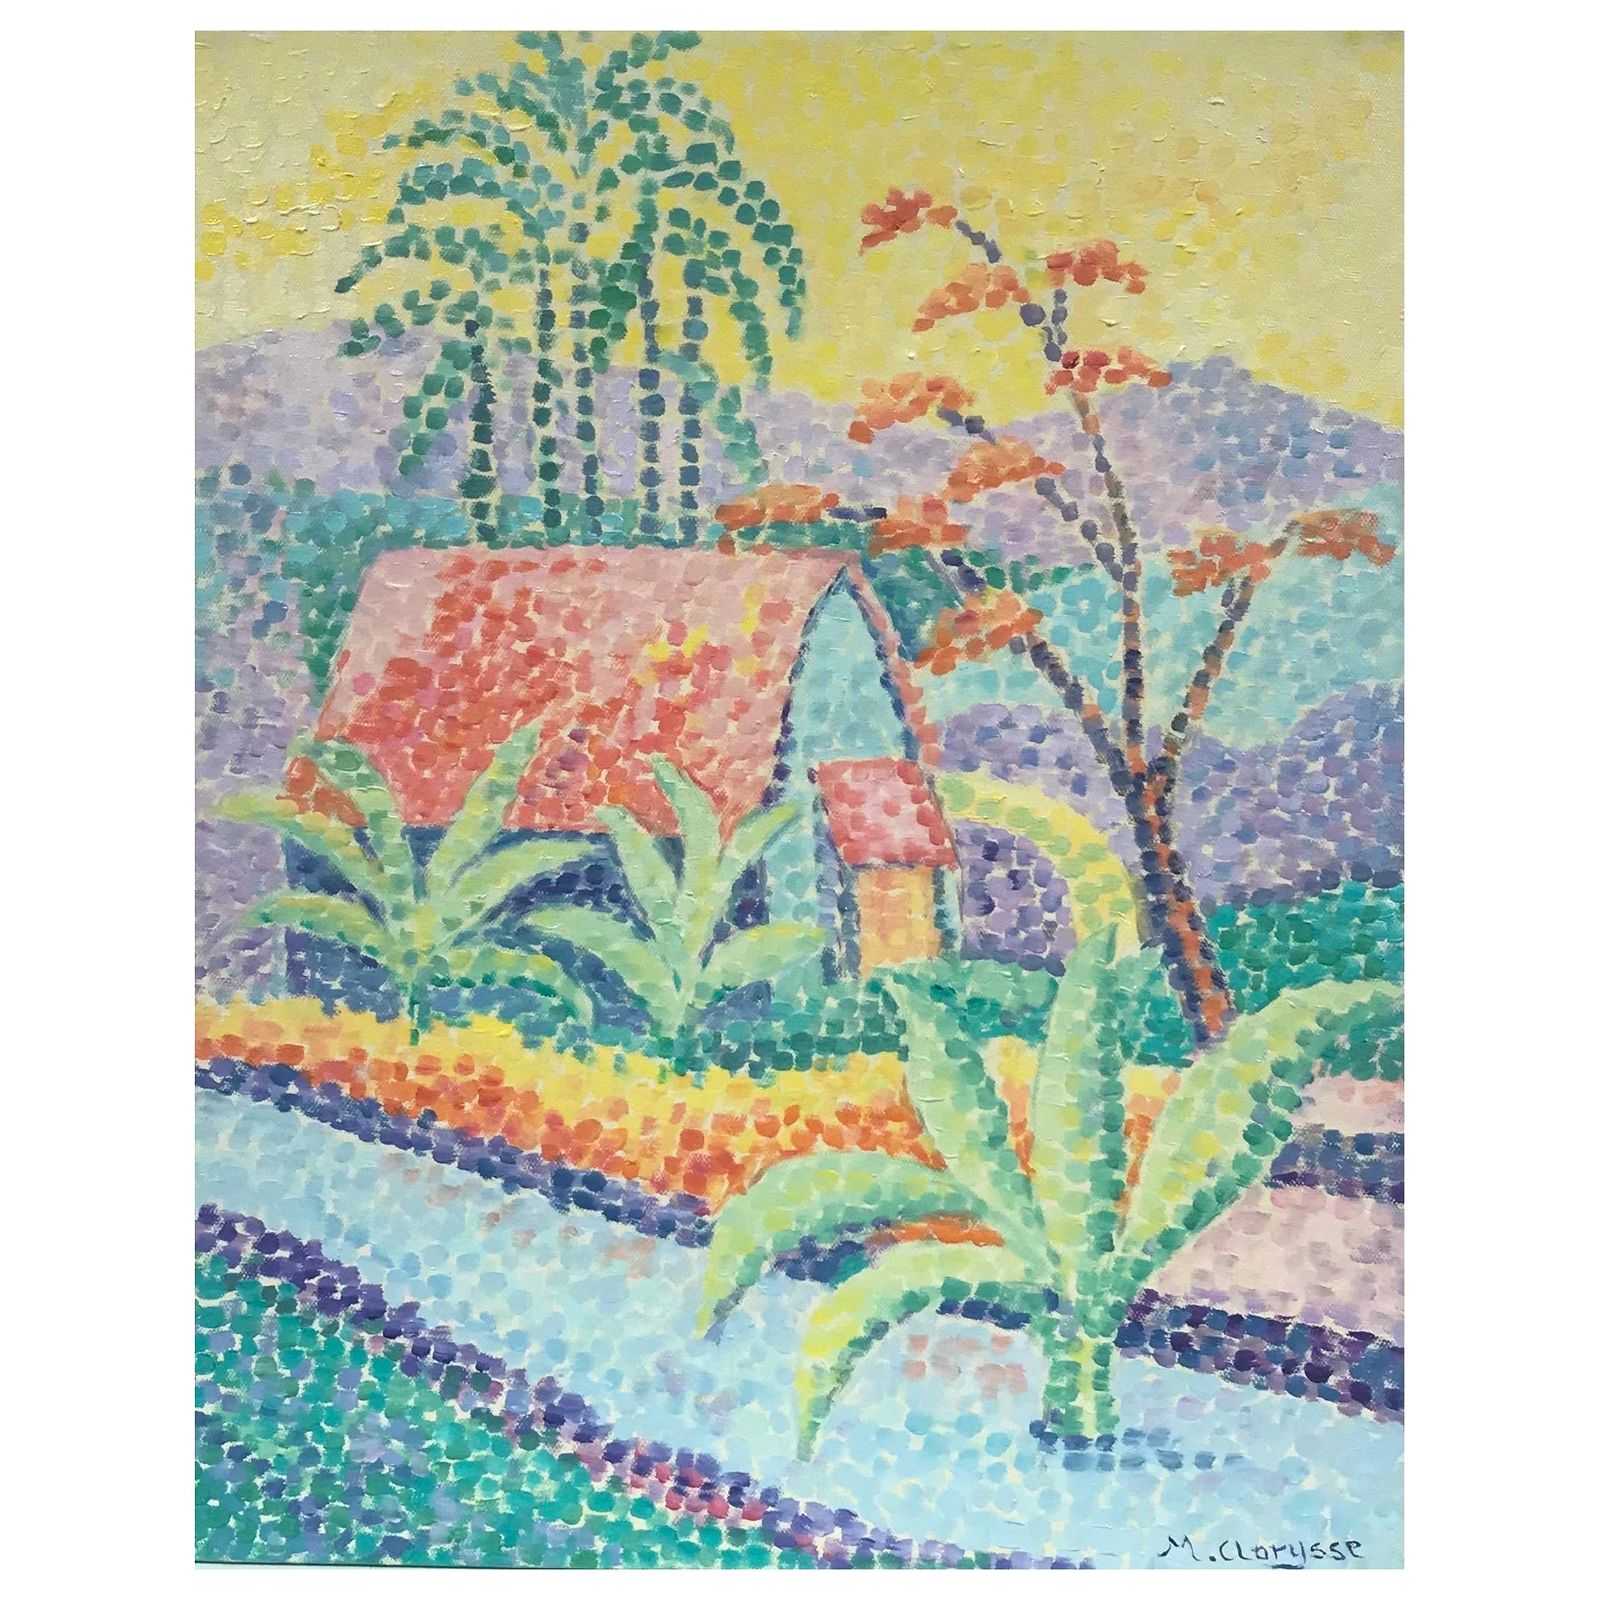 Circa-2000 Pointillist oil on canvas by Belgian-born French artist Maggy Clarysse, estimated at $2,500-$3,000 at Jasper52.